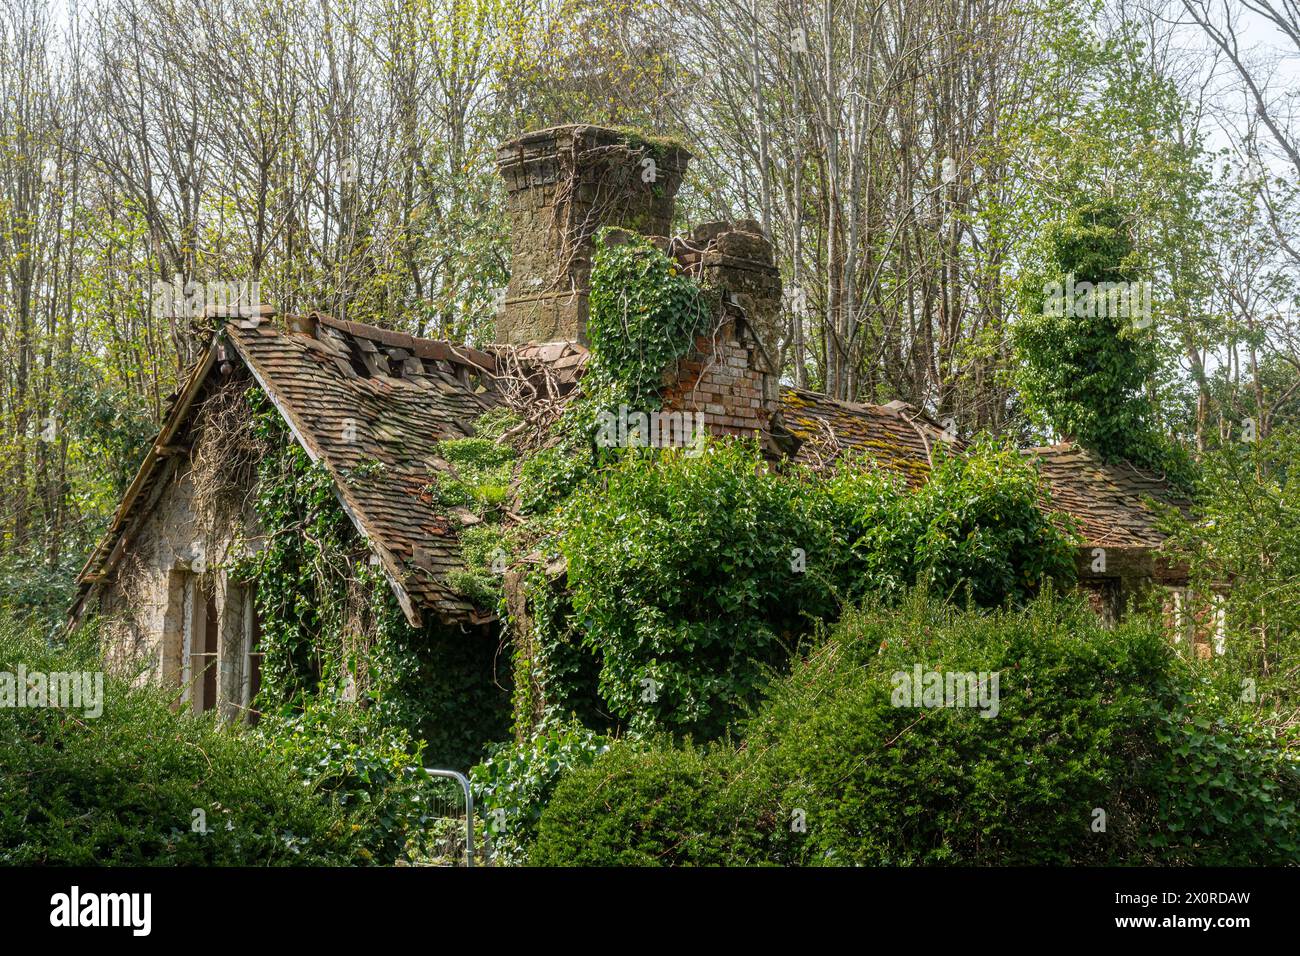 Derelict old country cottage overgrown with vegetation, UK, abandoned empty house being reclaimed by nature Stock Photo